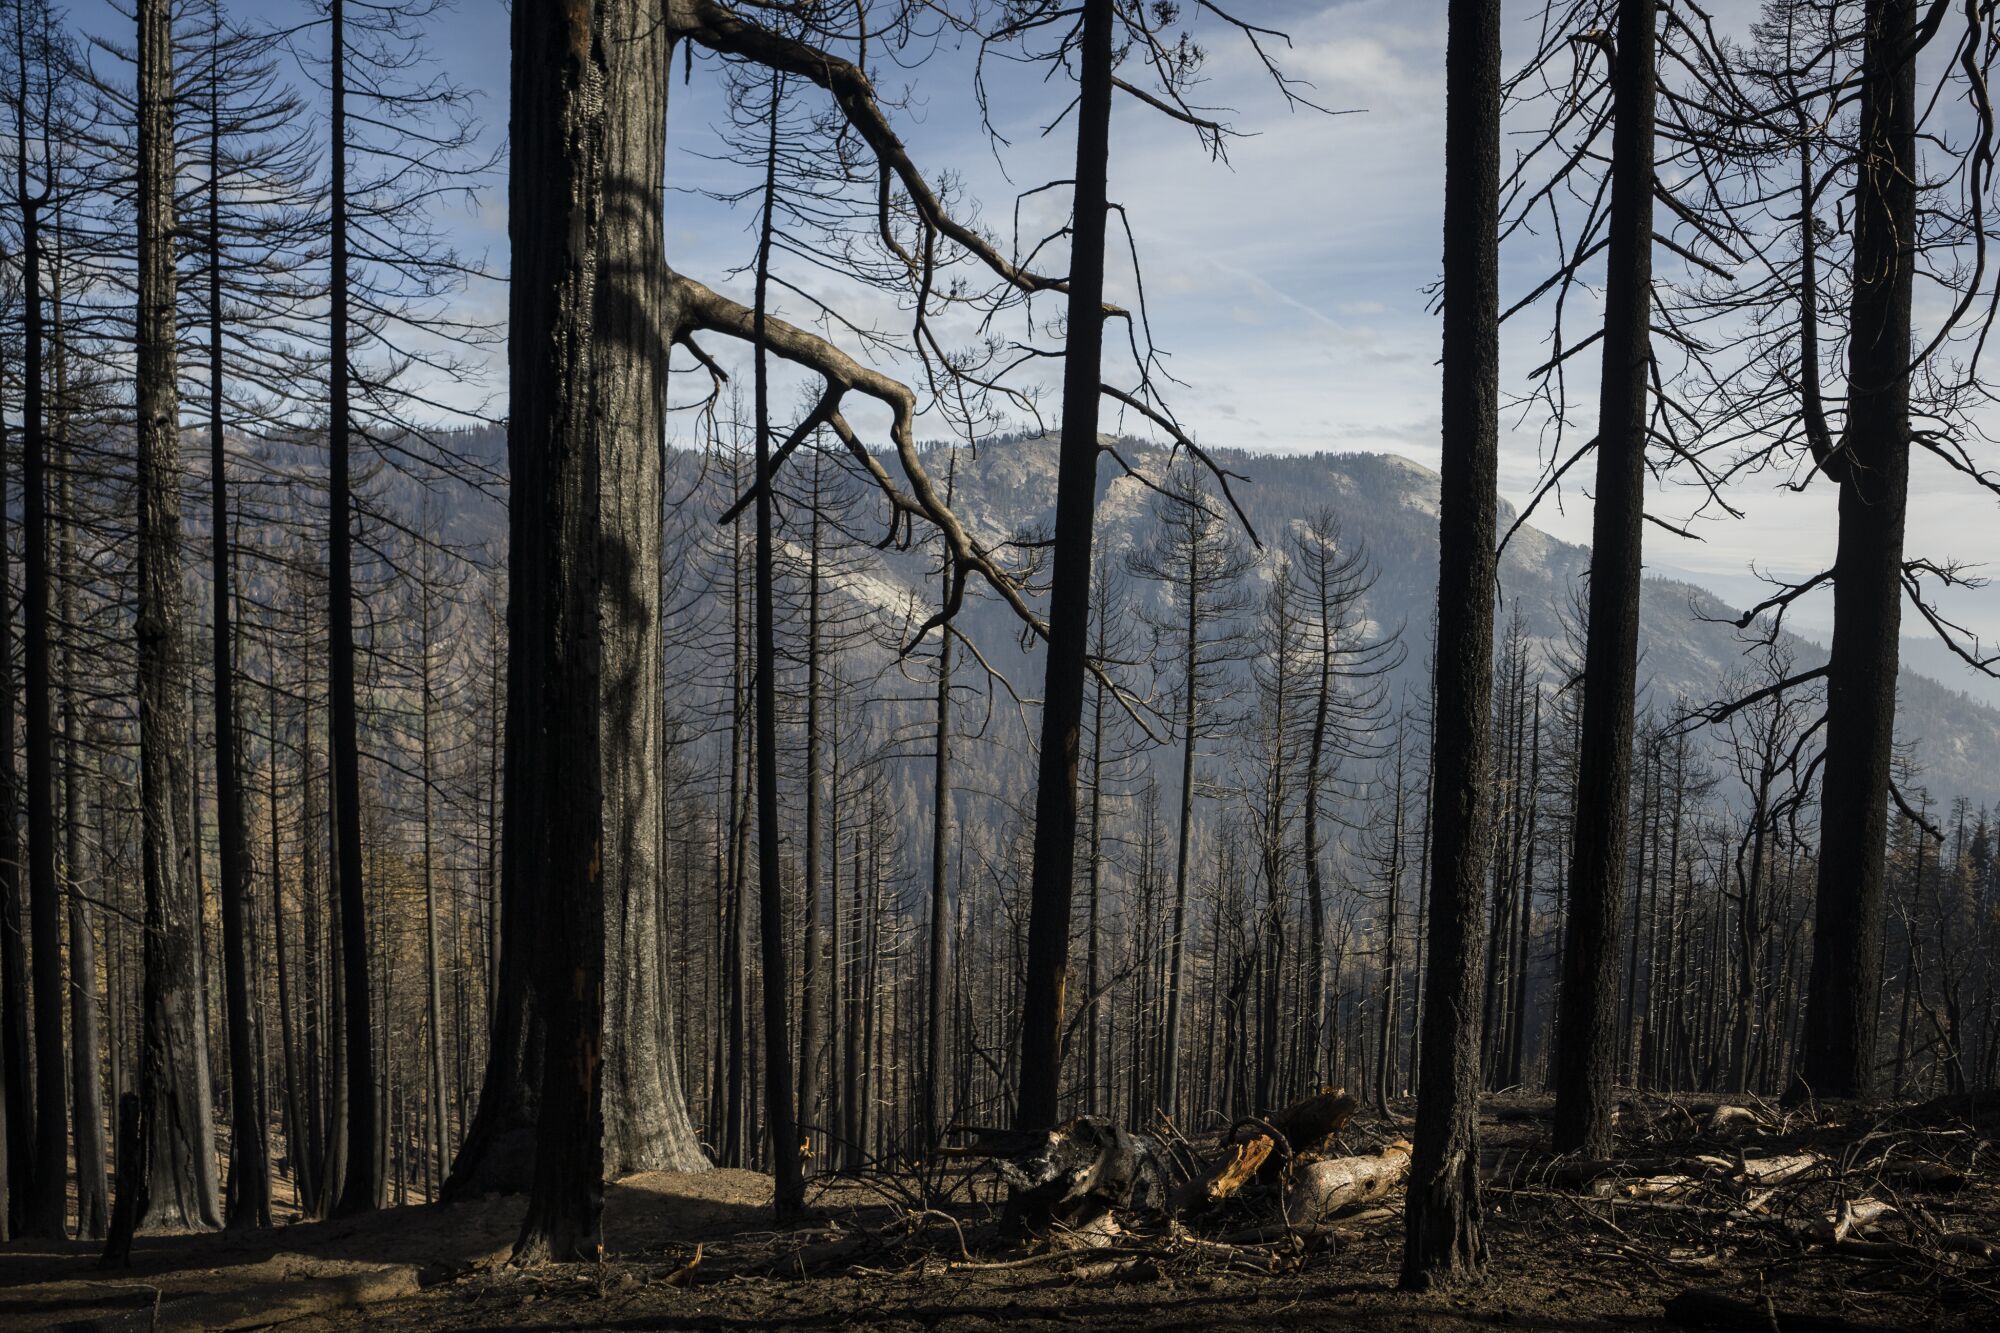 A stand of burned sequoia trees.